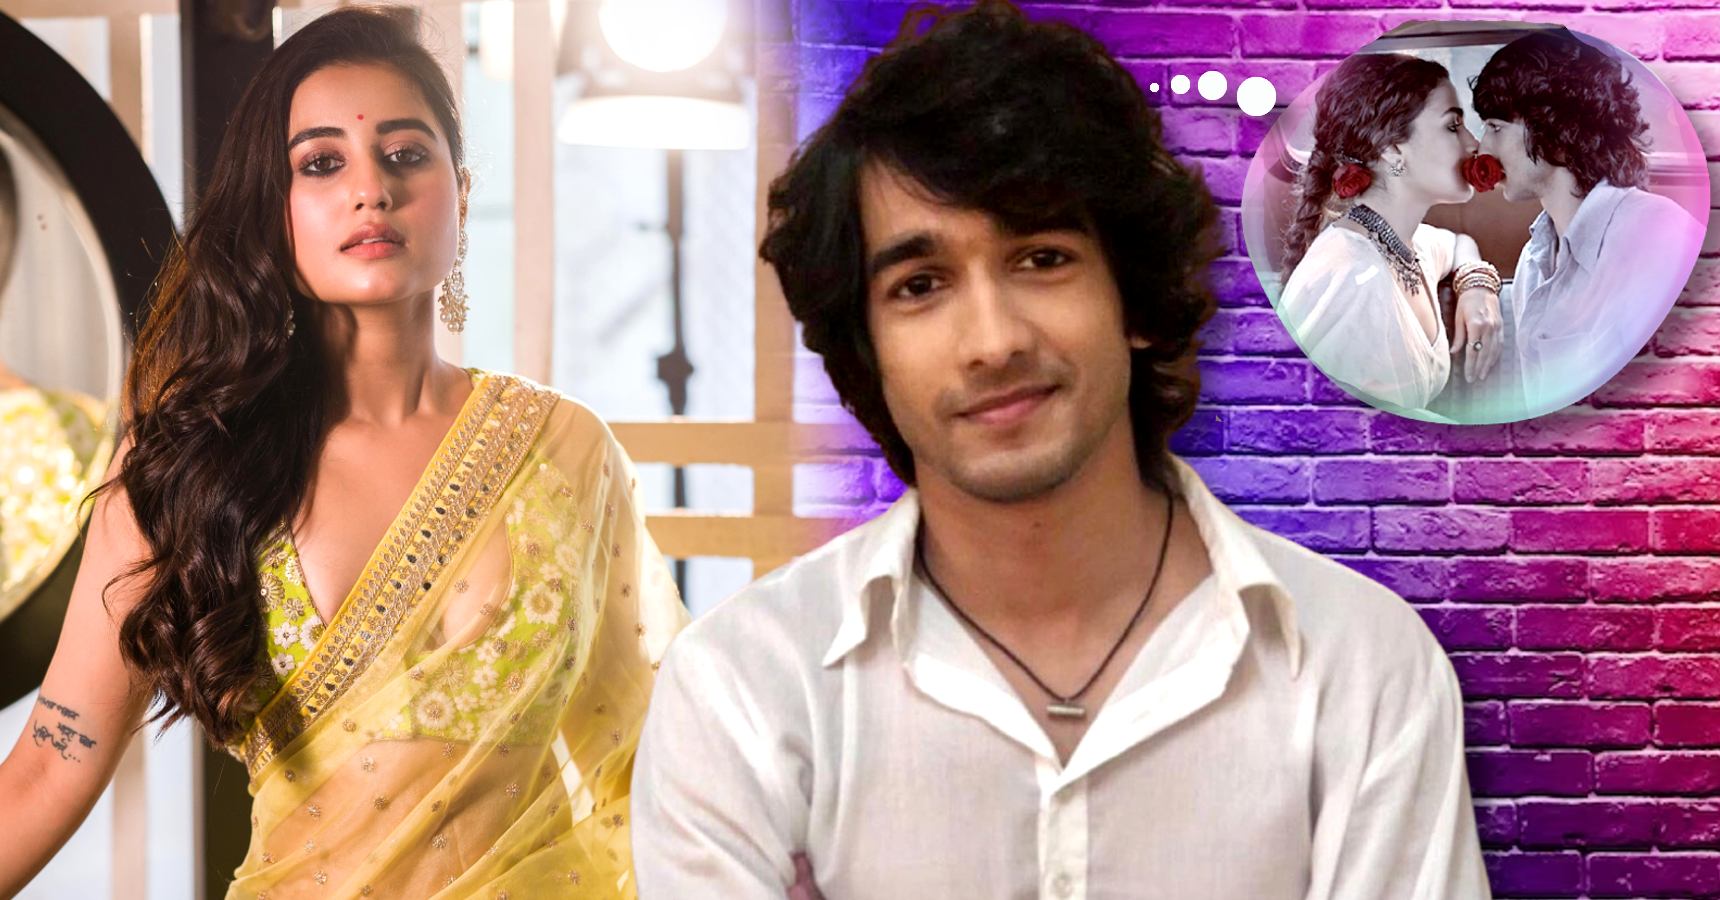 Shantanu Maheshwari opens up about his first ever experience in bengali cinema